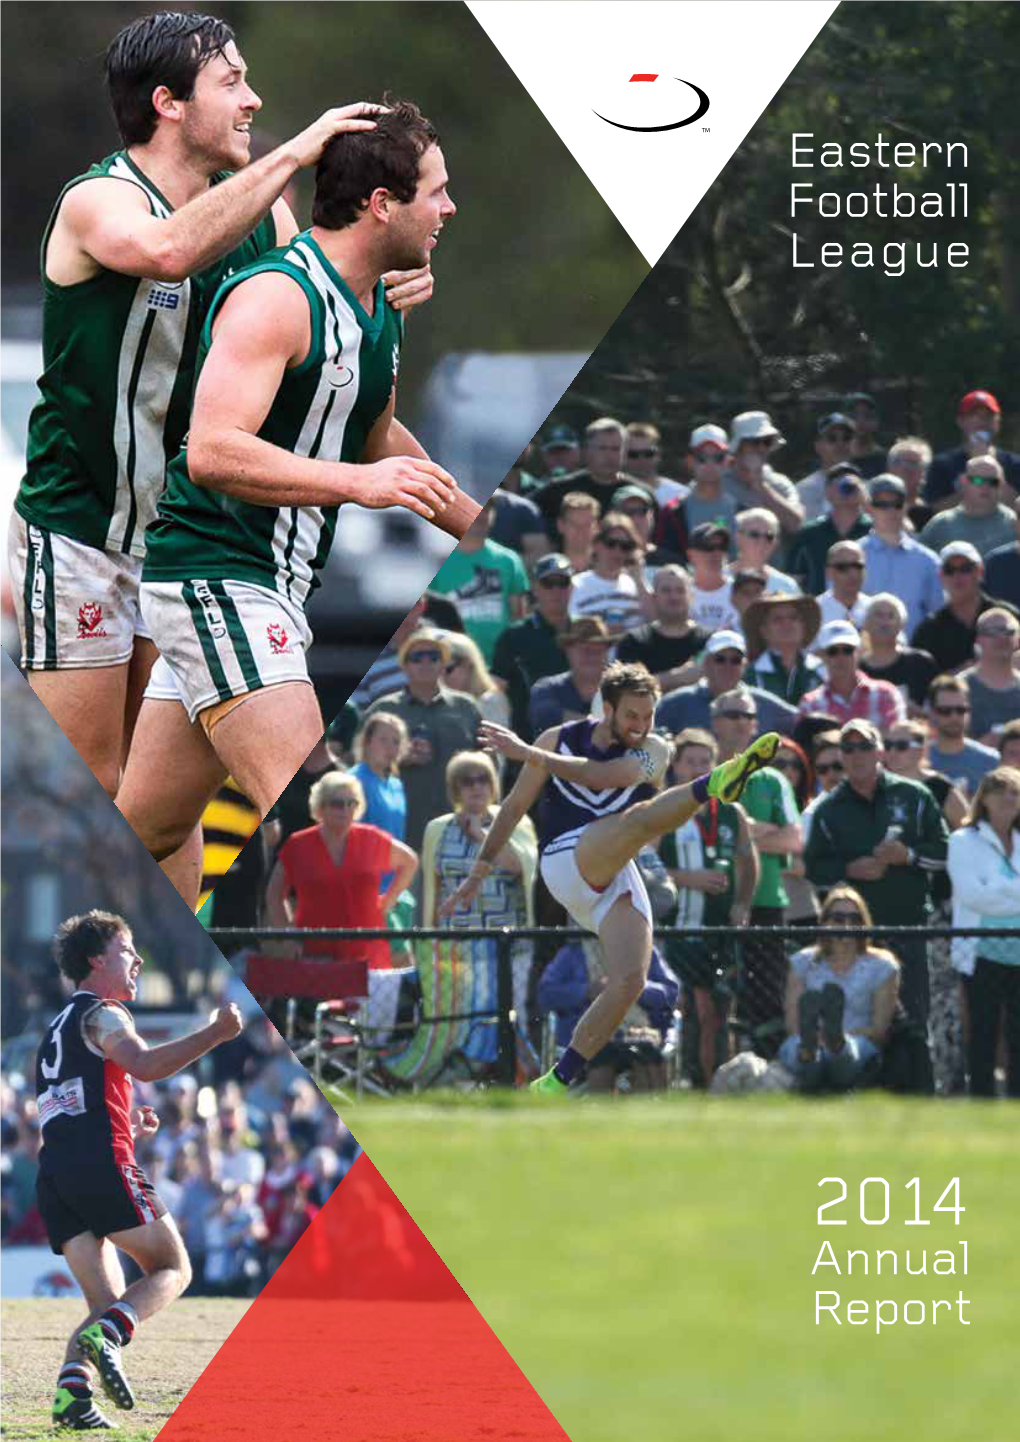 2014 Annual Report Left: Ferntree Gully Were Prominant in This Years Junior Finals, Taking Home Three Premierships